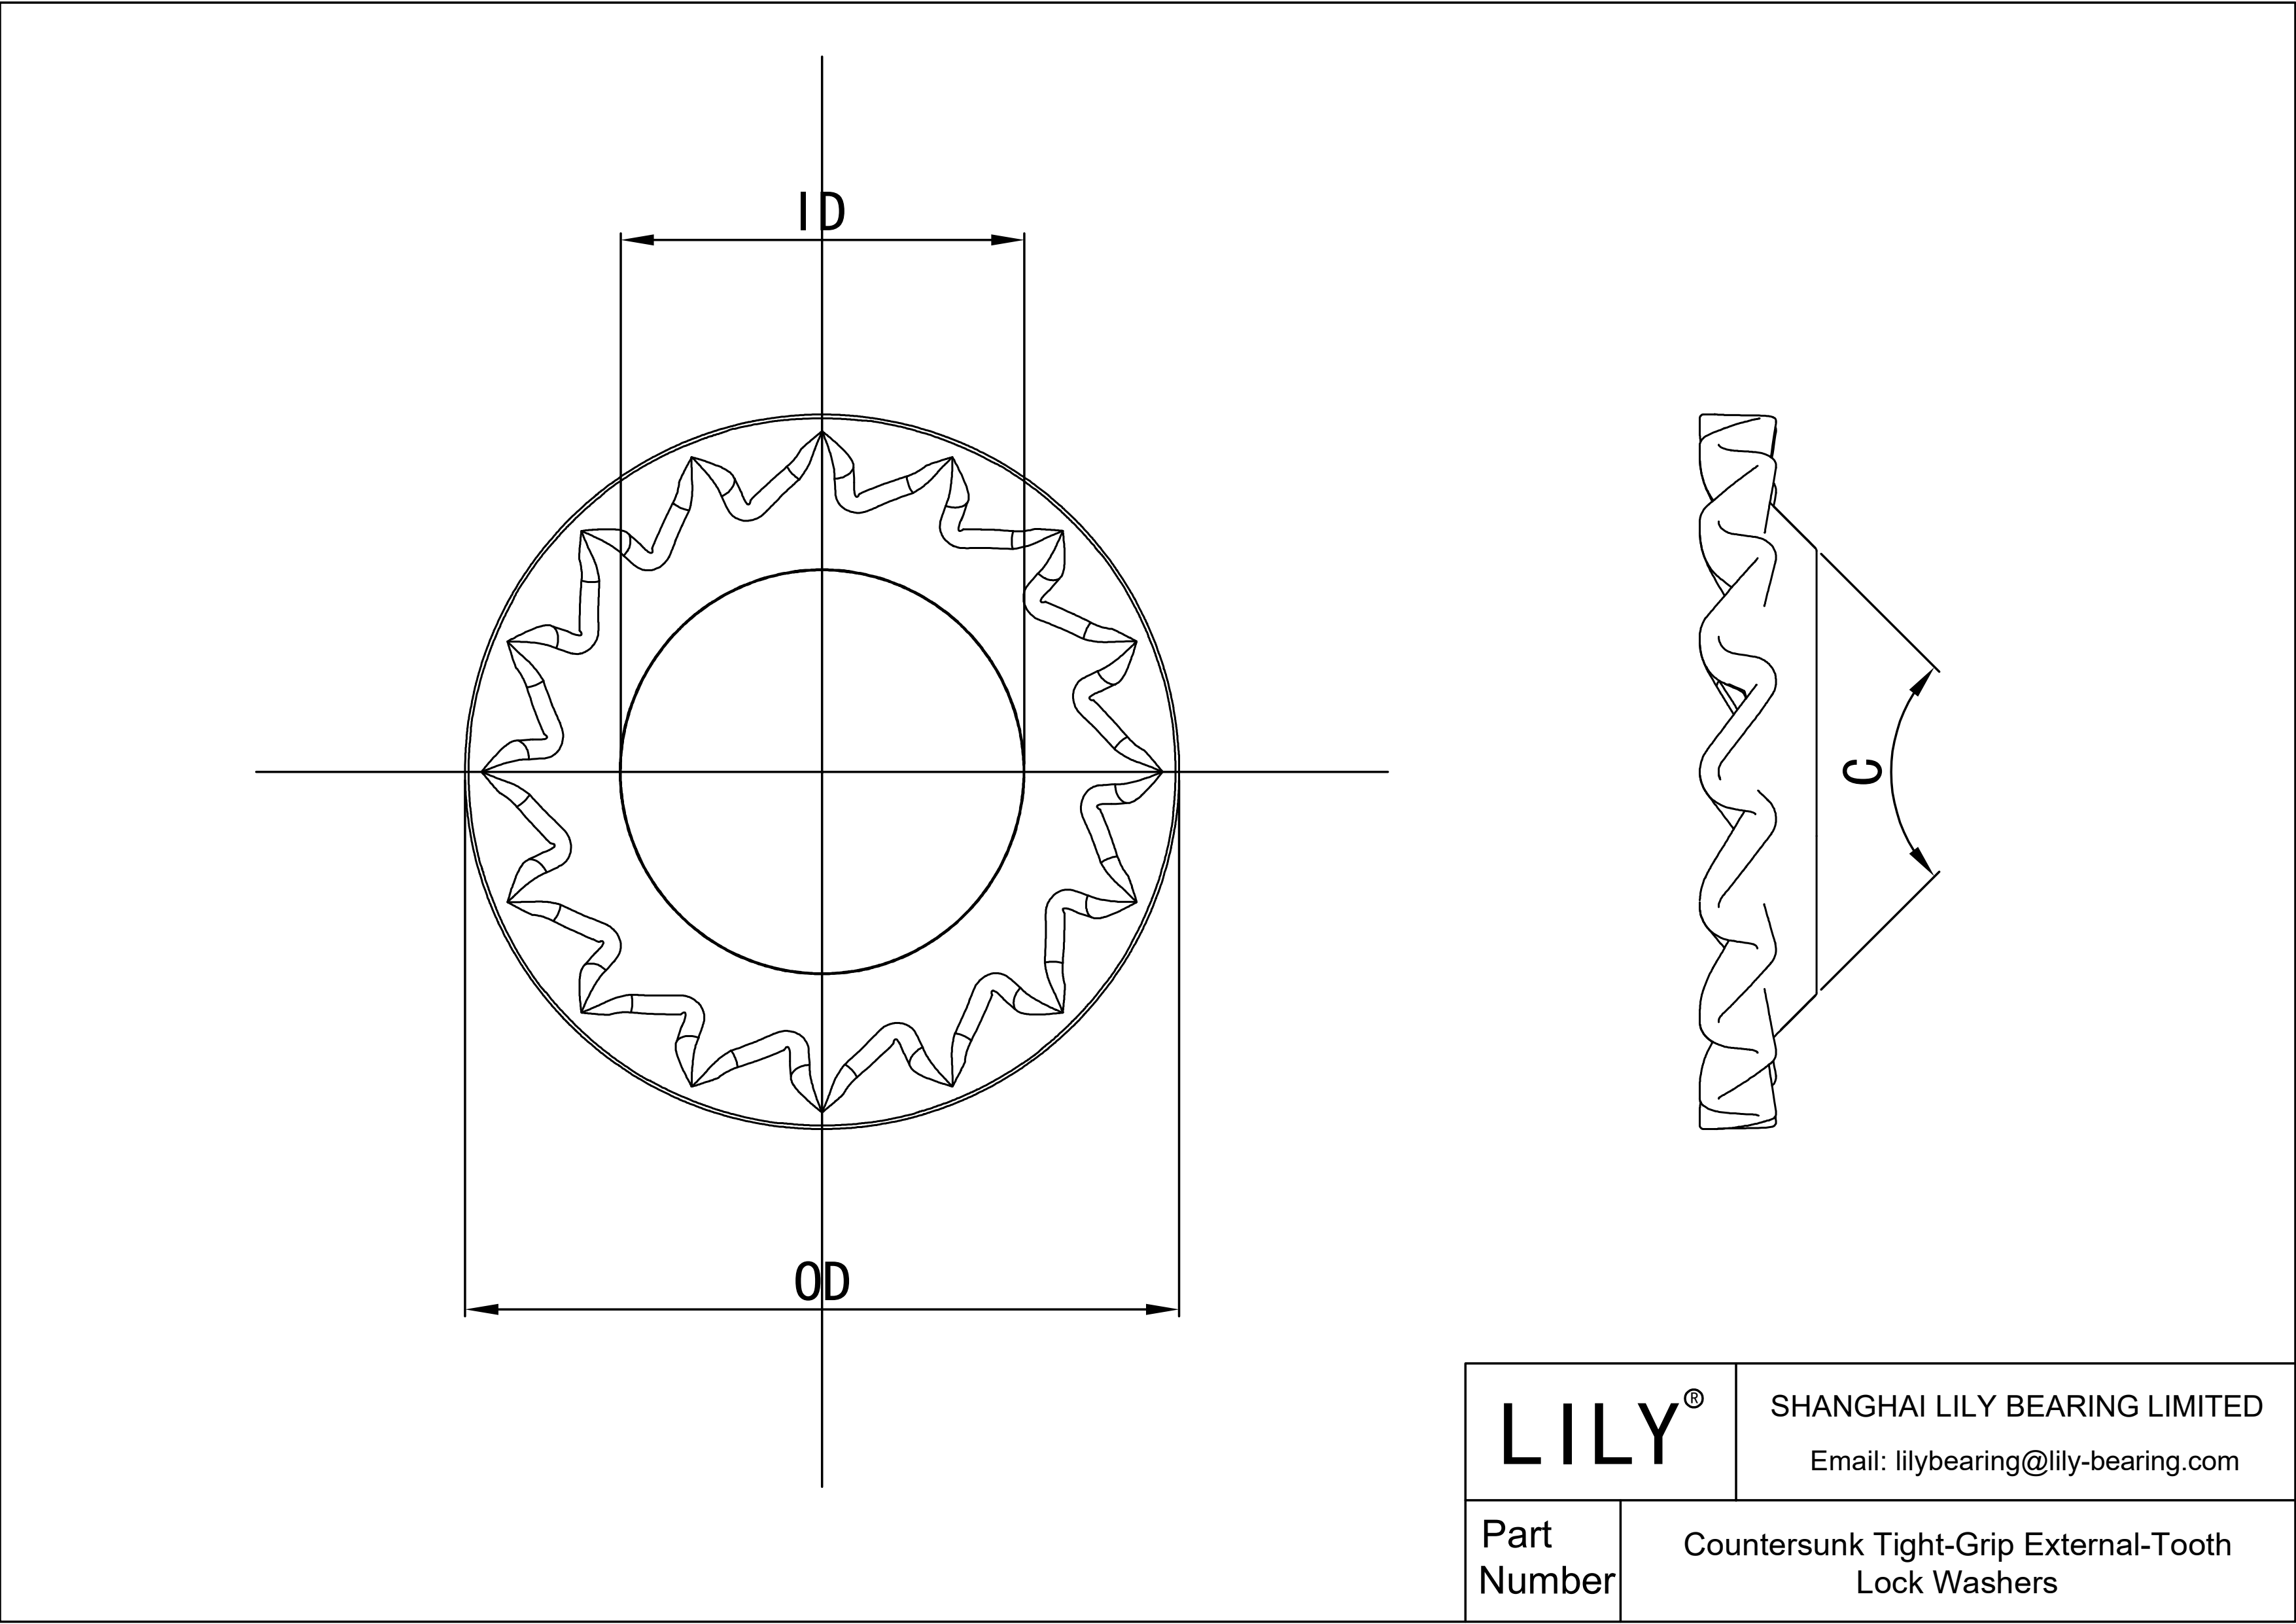 EDEANBBH Countersunk Tight-Grip External-Tooth Lock Washers cad drawing